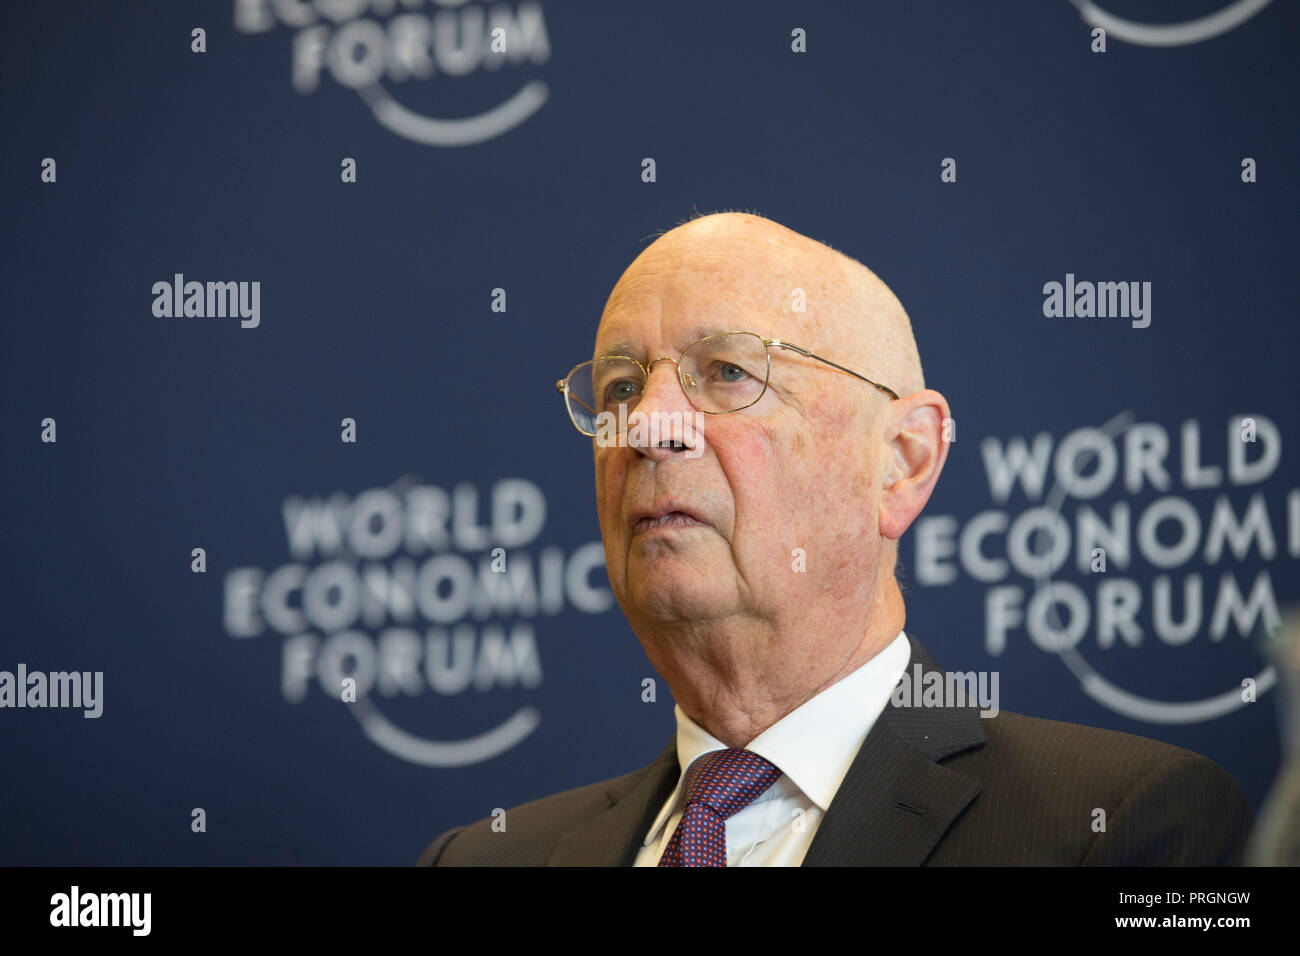 Geneva, Switzerland. 2nd Oct, 2018. Klaus Schwab, founder and executive chairman of the World Economic Forum (WEF), attends a press conference after Strategic Dialogue on the Western Balkans at the WEF headquarters in Cologny near Geneva, Switzerland, Oct. 2, 2018. Leaders from the Western Balkan countries and neighboring countries on Tuesday set out measures to continue dialogue and cooperation to ensure regional stability and boost economic growth and competitiveness. Credit: Xu Jinquan/Xinhua/Alamy Live News Stock Photo